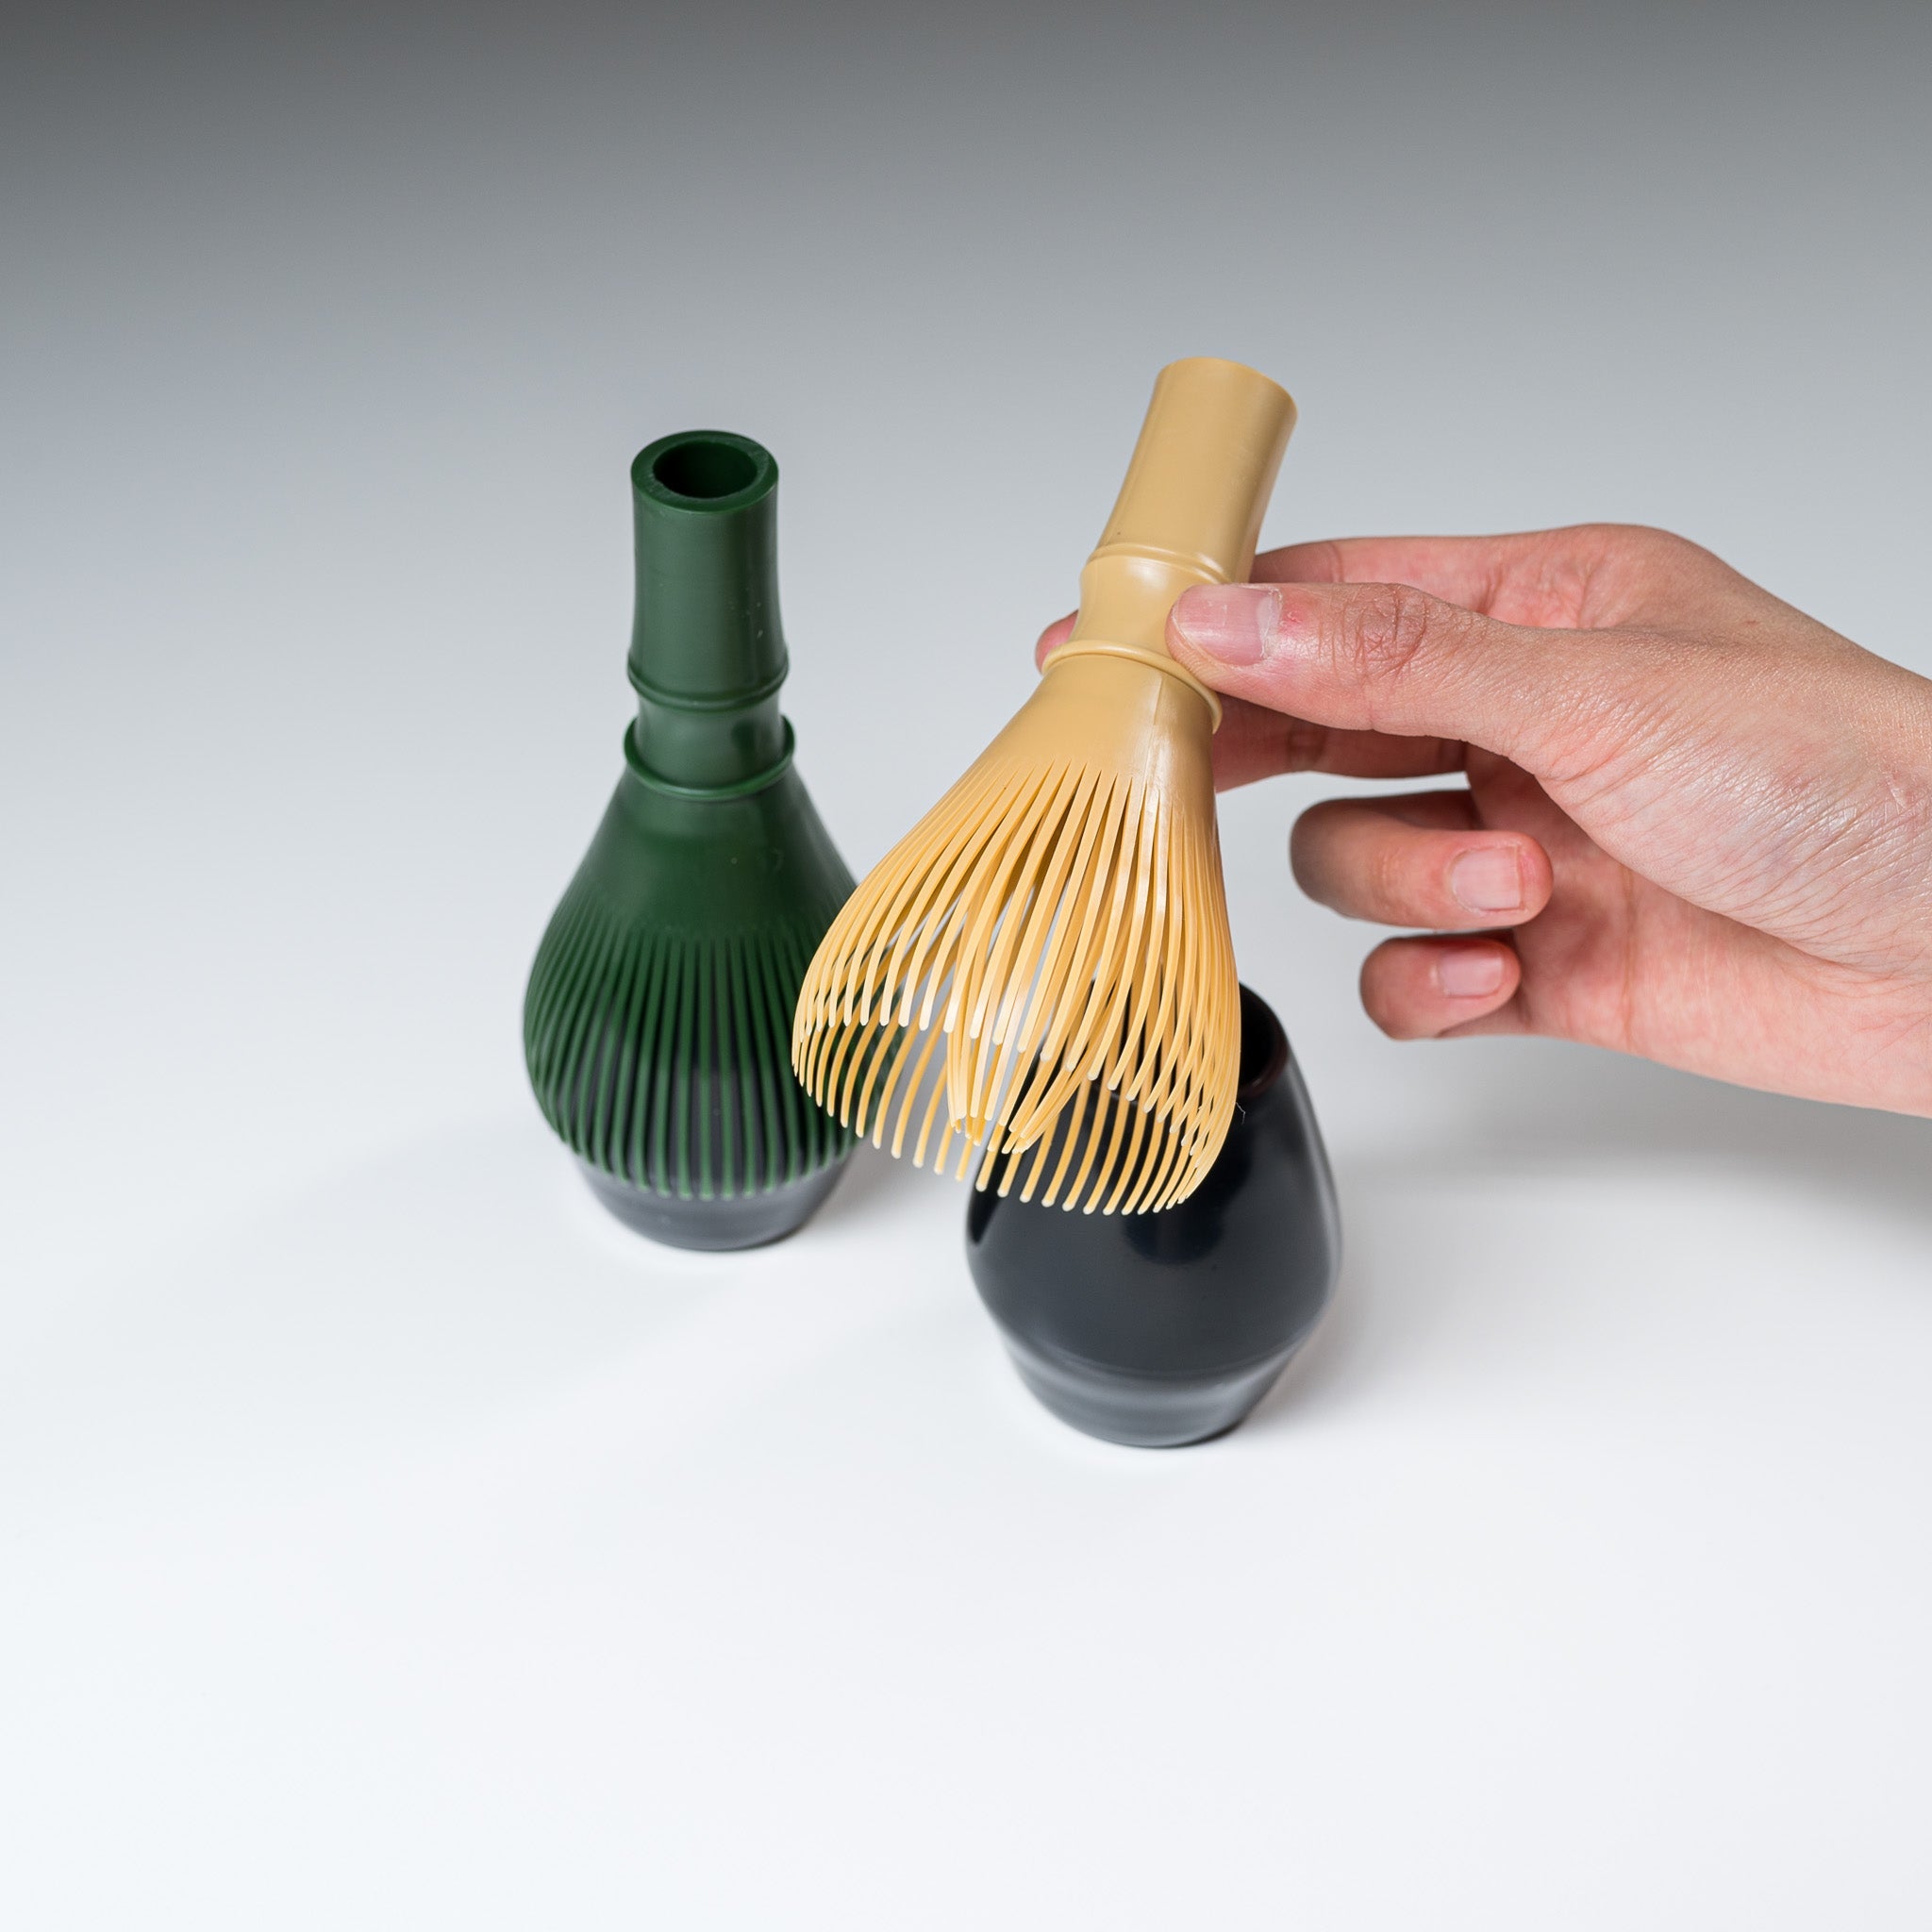 Made In Japan Resin Matcha Whisk - Green / 樹脂茶筅